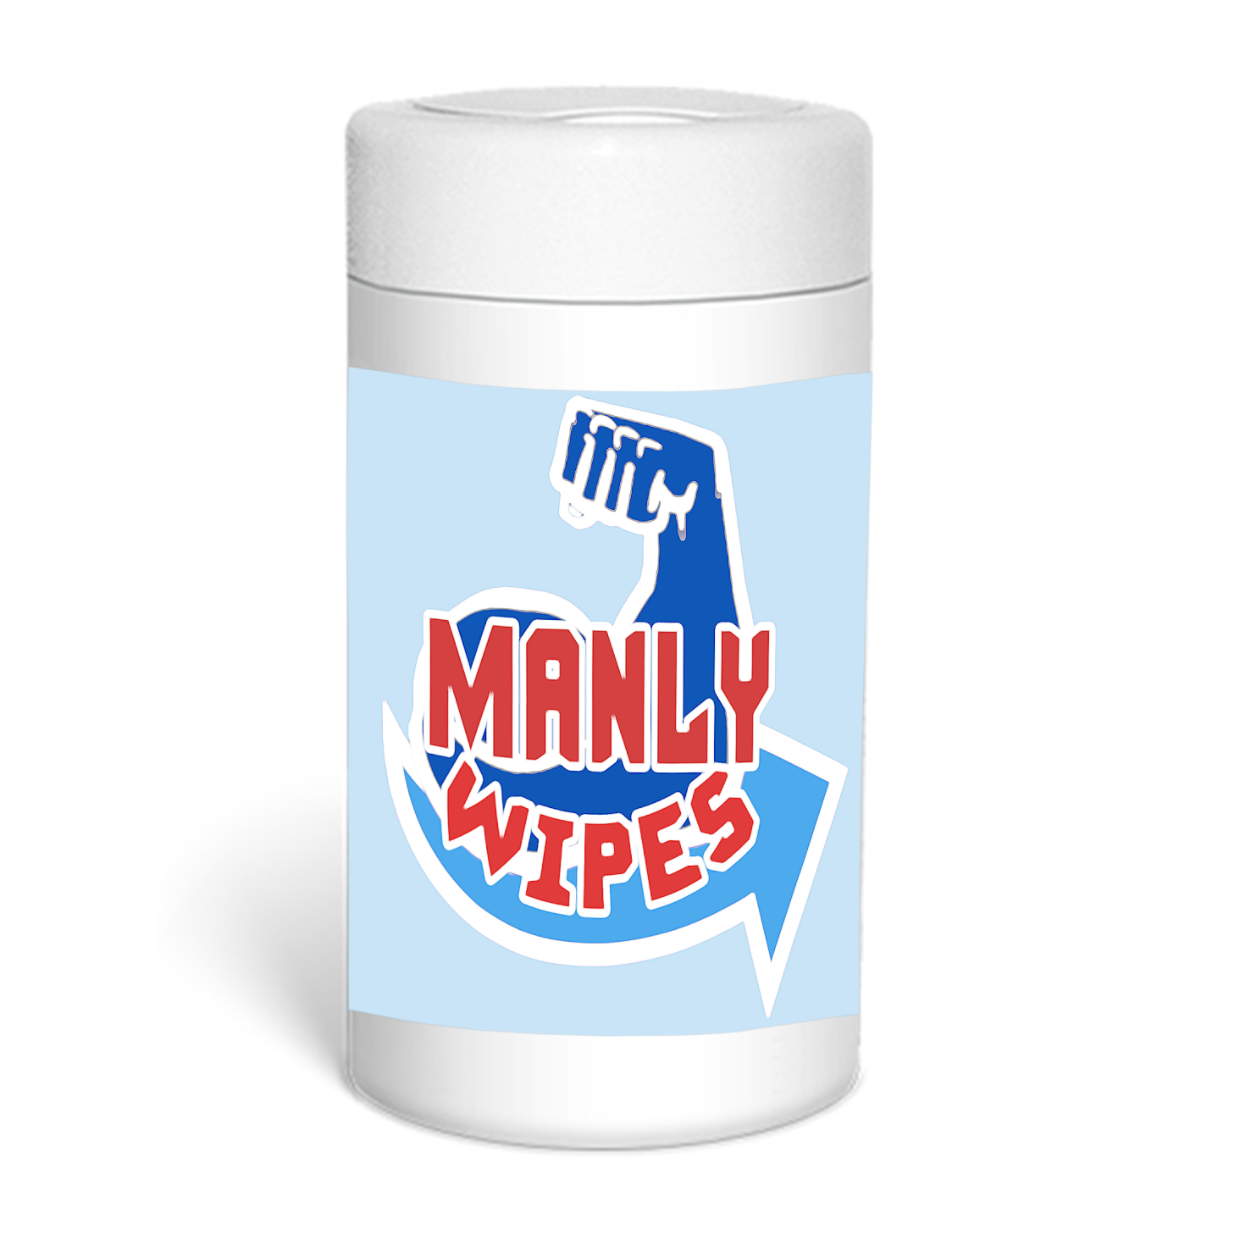 Manly Wipes